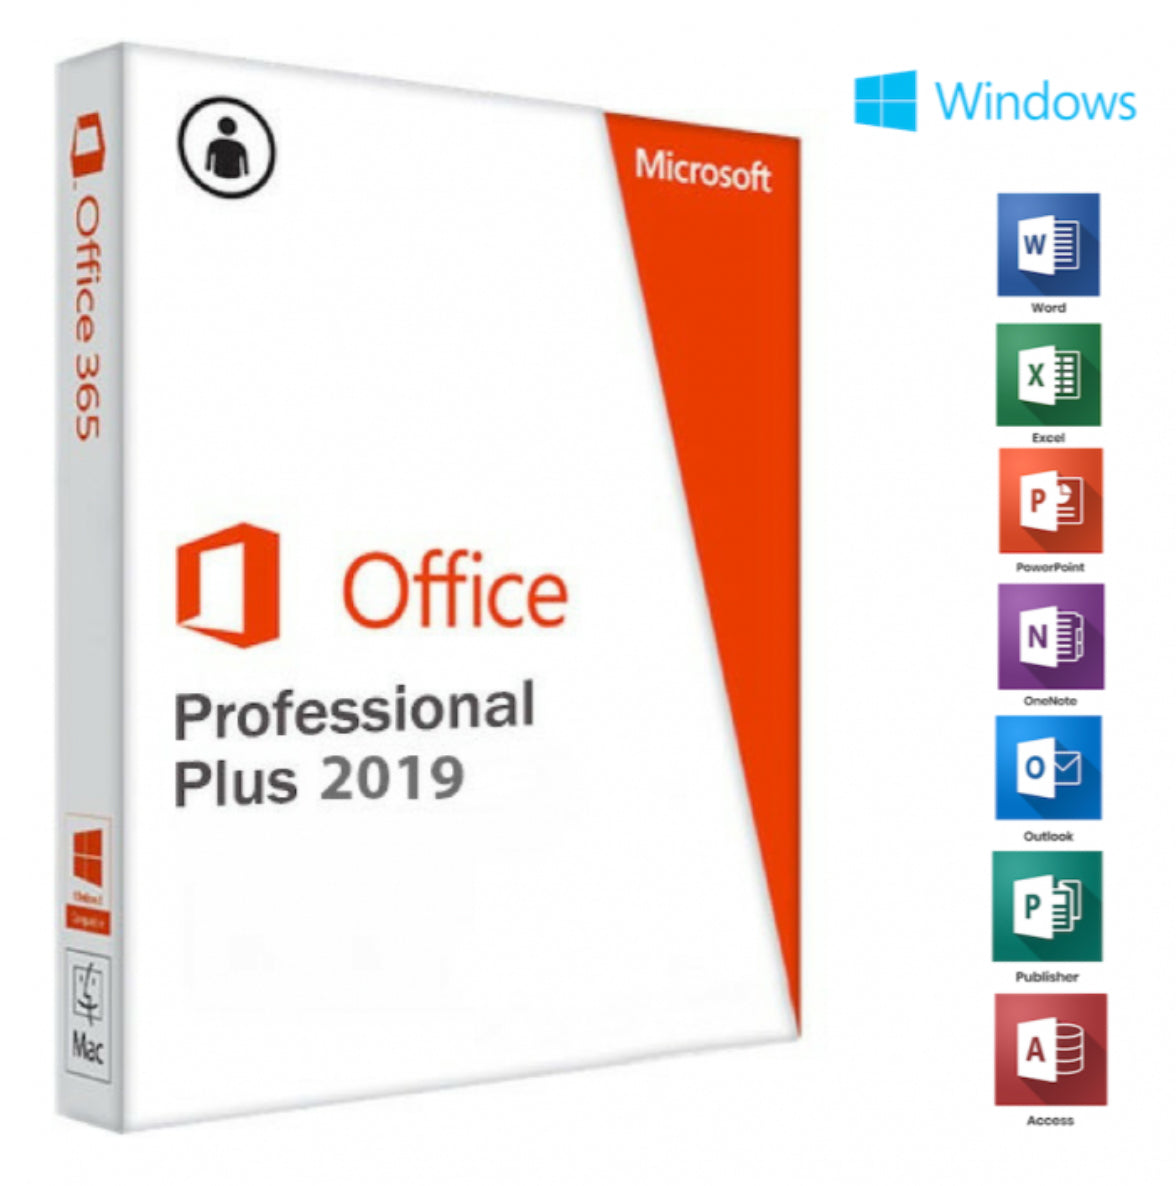 Microsoft Office Professional Plus 2019 for Windows: One-Time